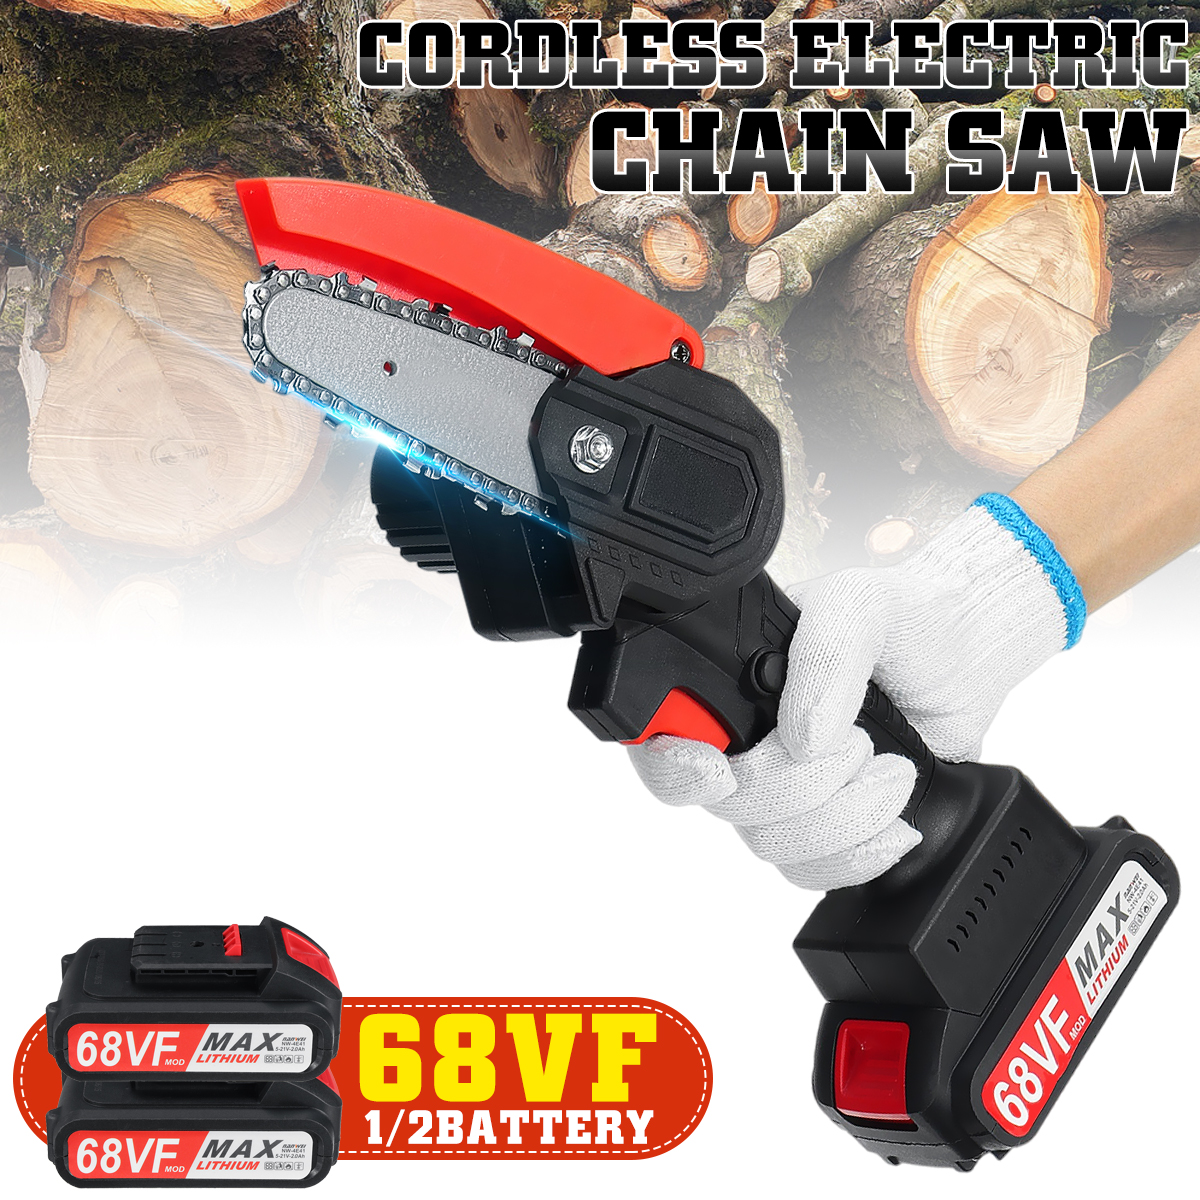 4-Inch-Mini-Cordless-Electric-Chain-Saw-One-Hand-Saw-Woodworking-Wood-Cutter-W-12-Battery-1879172-1